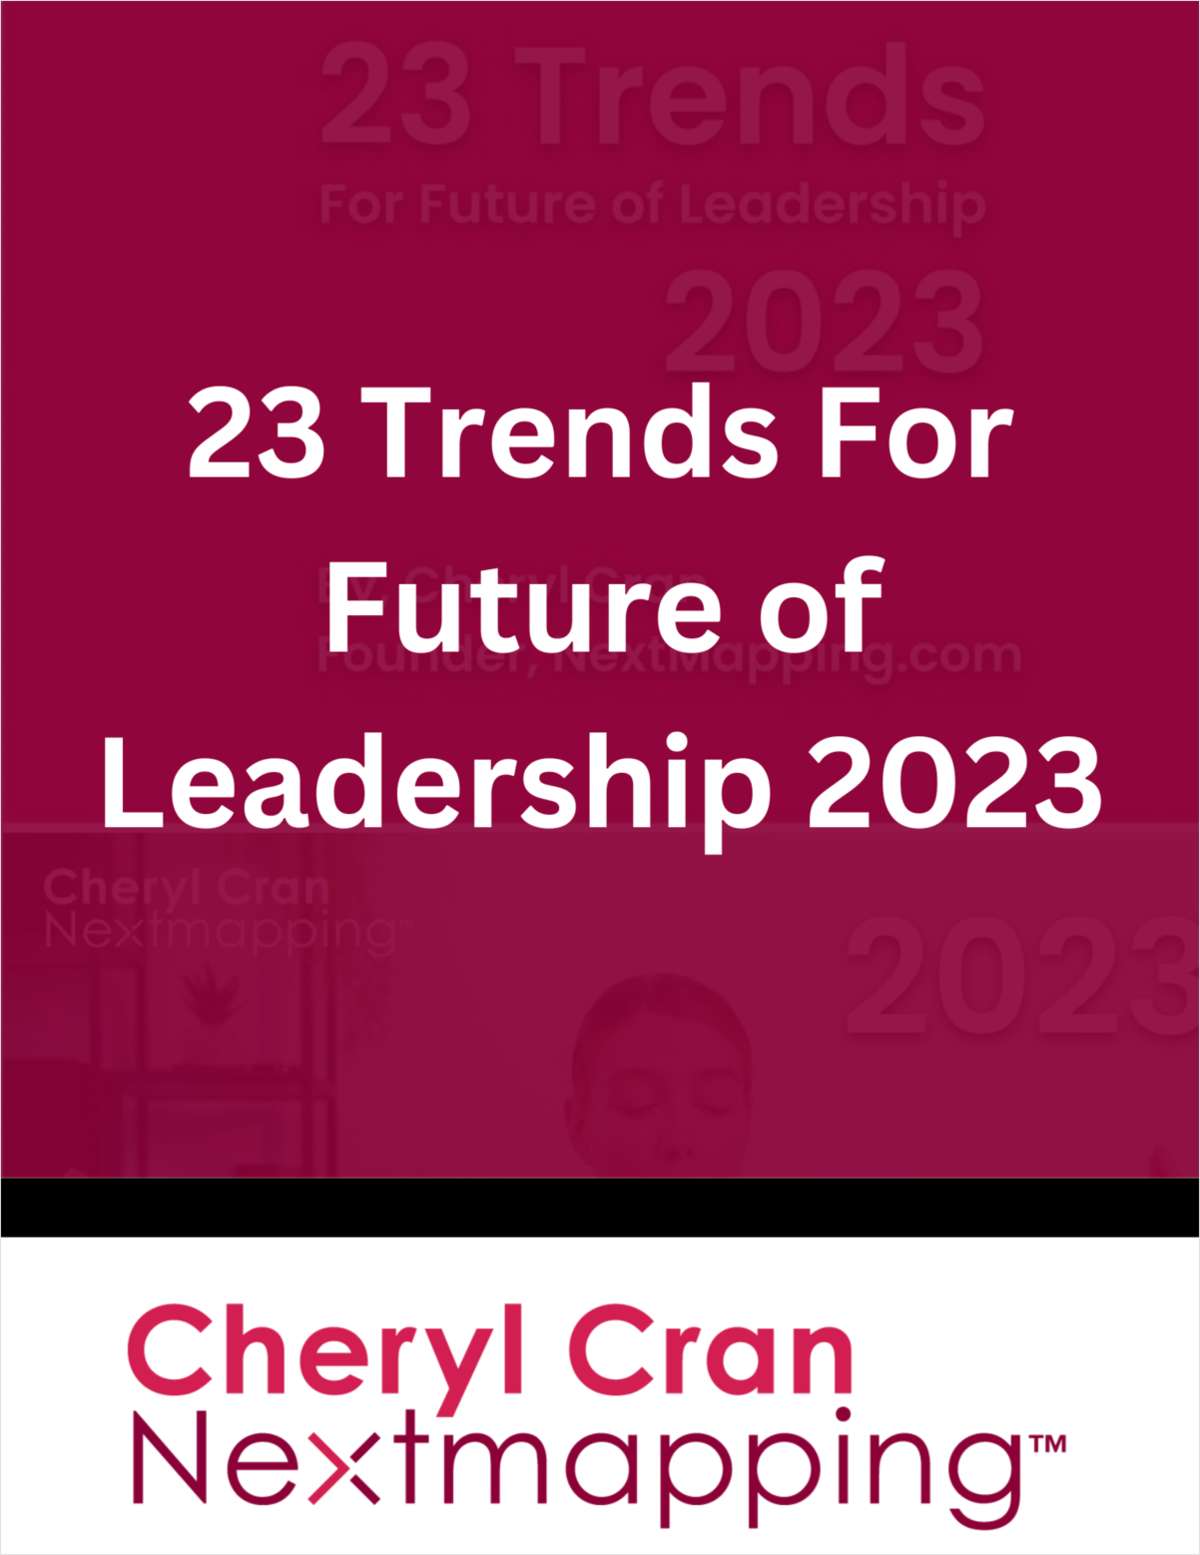 23 Trends For Future of Leadership 2023